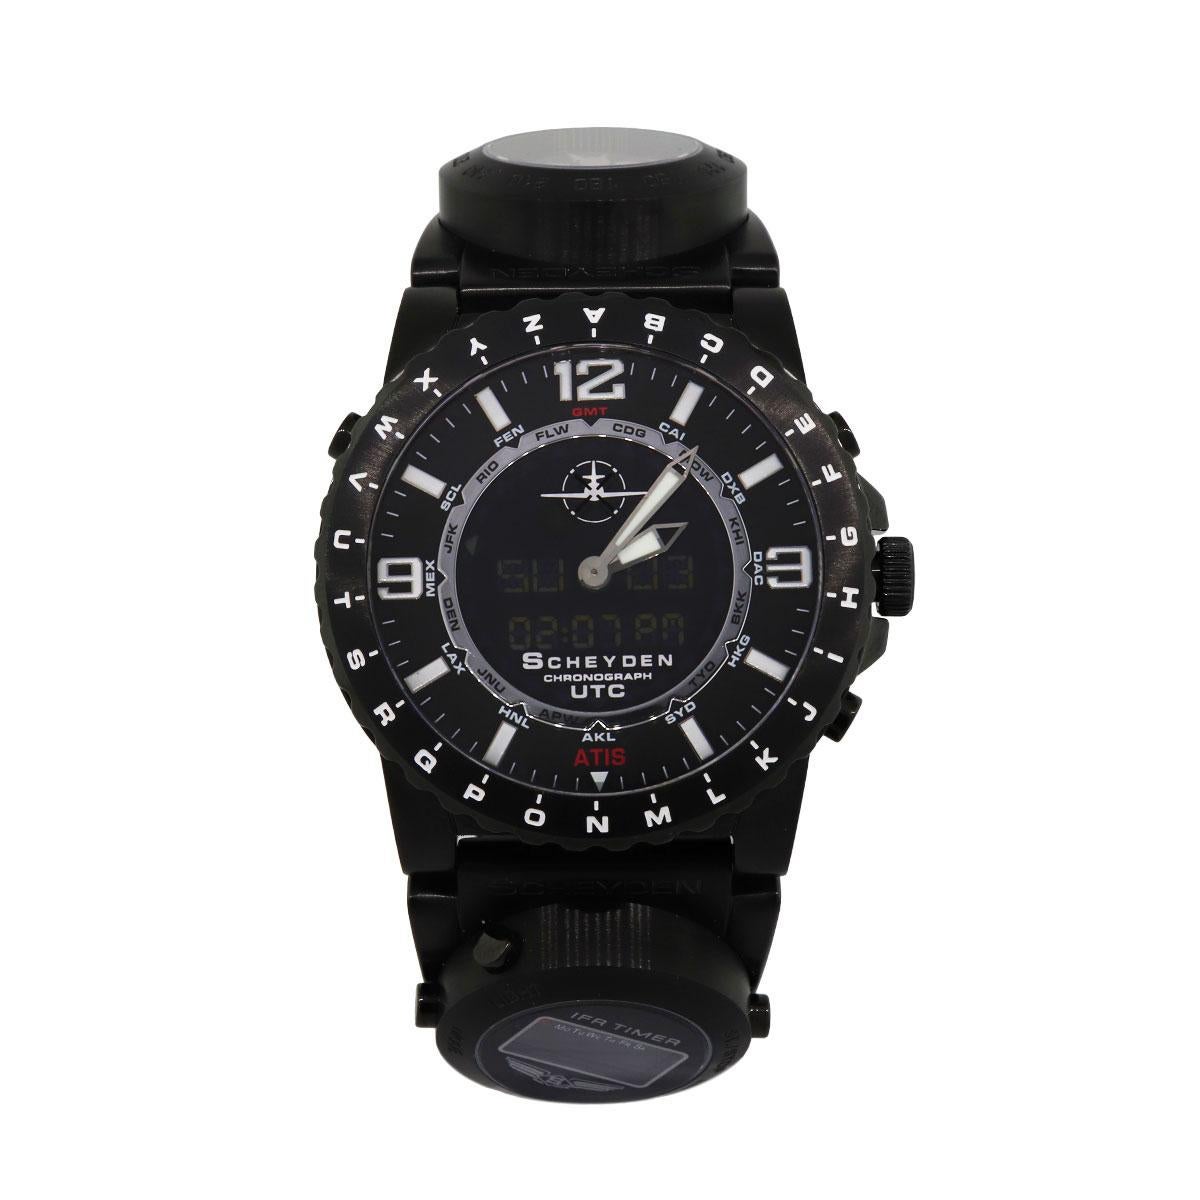 Brand: Scheyden
Model: True Aviator
Case Material: Stainless Steel with black PVD coating
Case Diameter: 47mm
Crystal: Sapphire crystal
Bezel: Aide Memoire Bi-Directional ATIS Bezel
Dial: Black dial with global airport identifiers/time